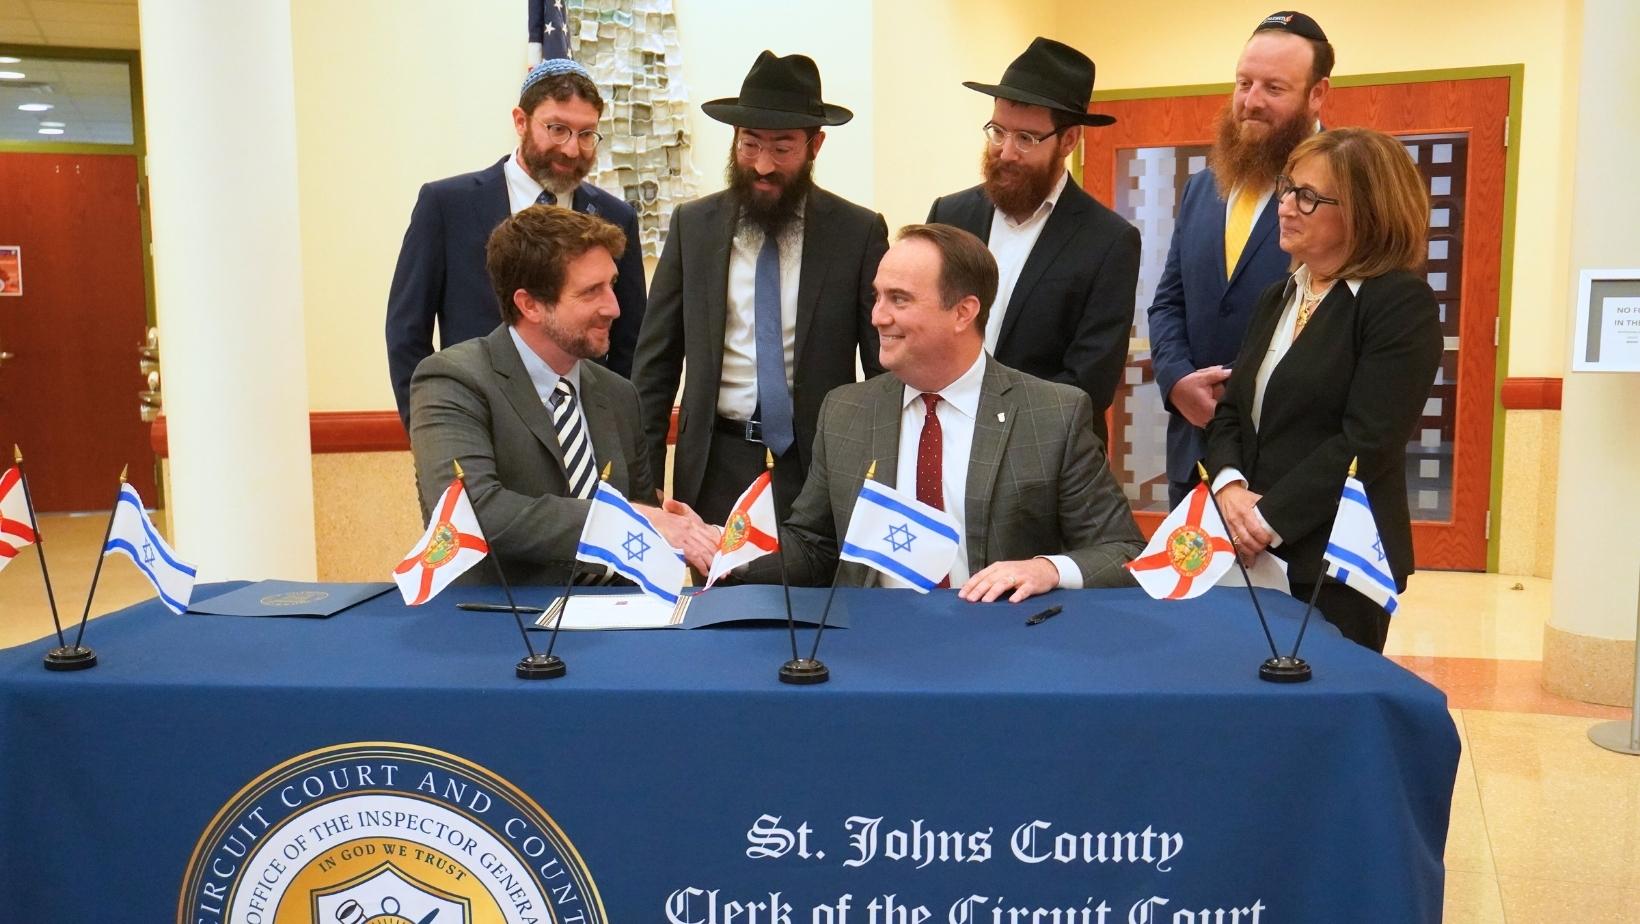 St. Johns County Clerk’s Office Recognizes St. Johns County – Israel Friendship Day